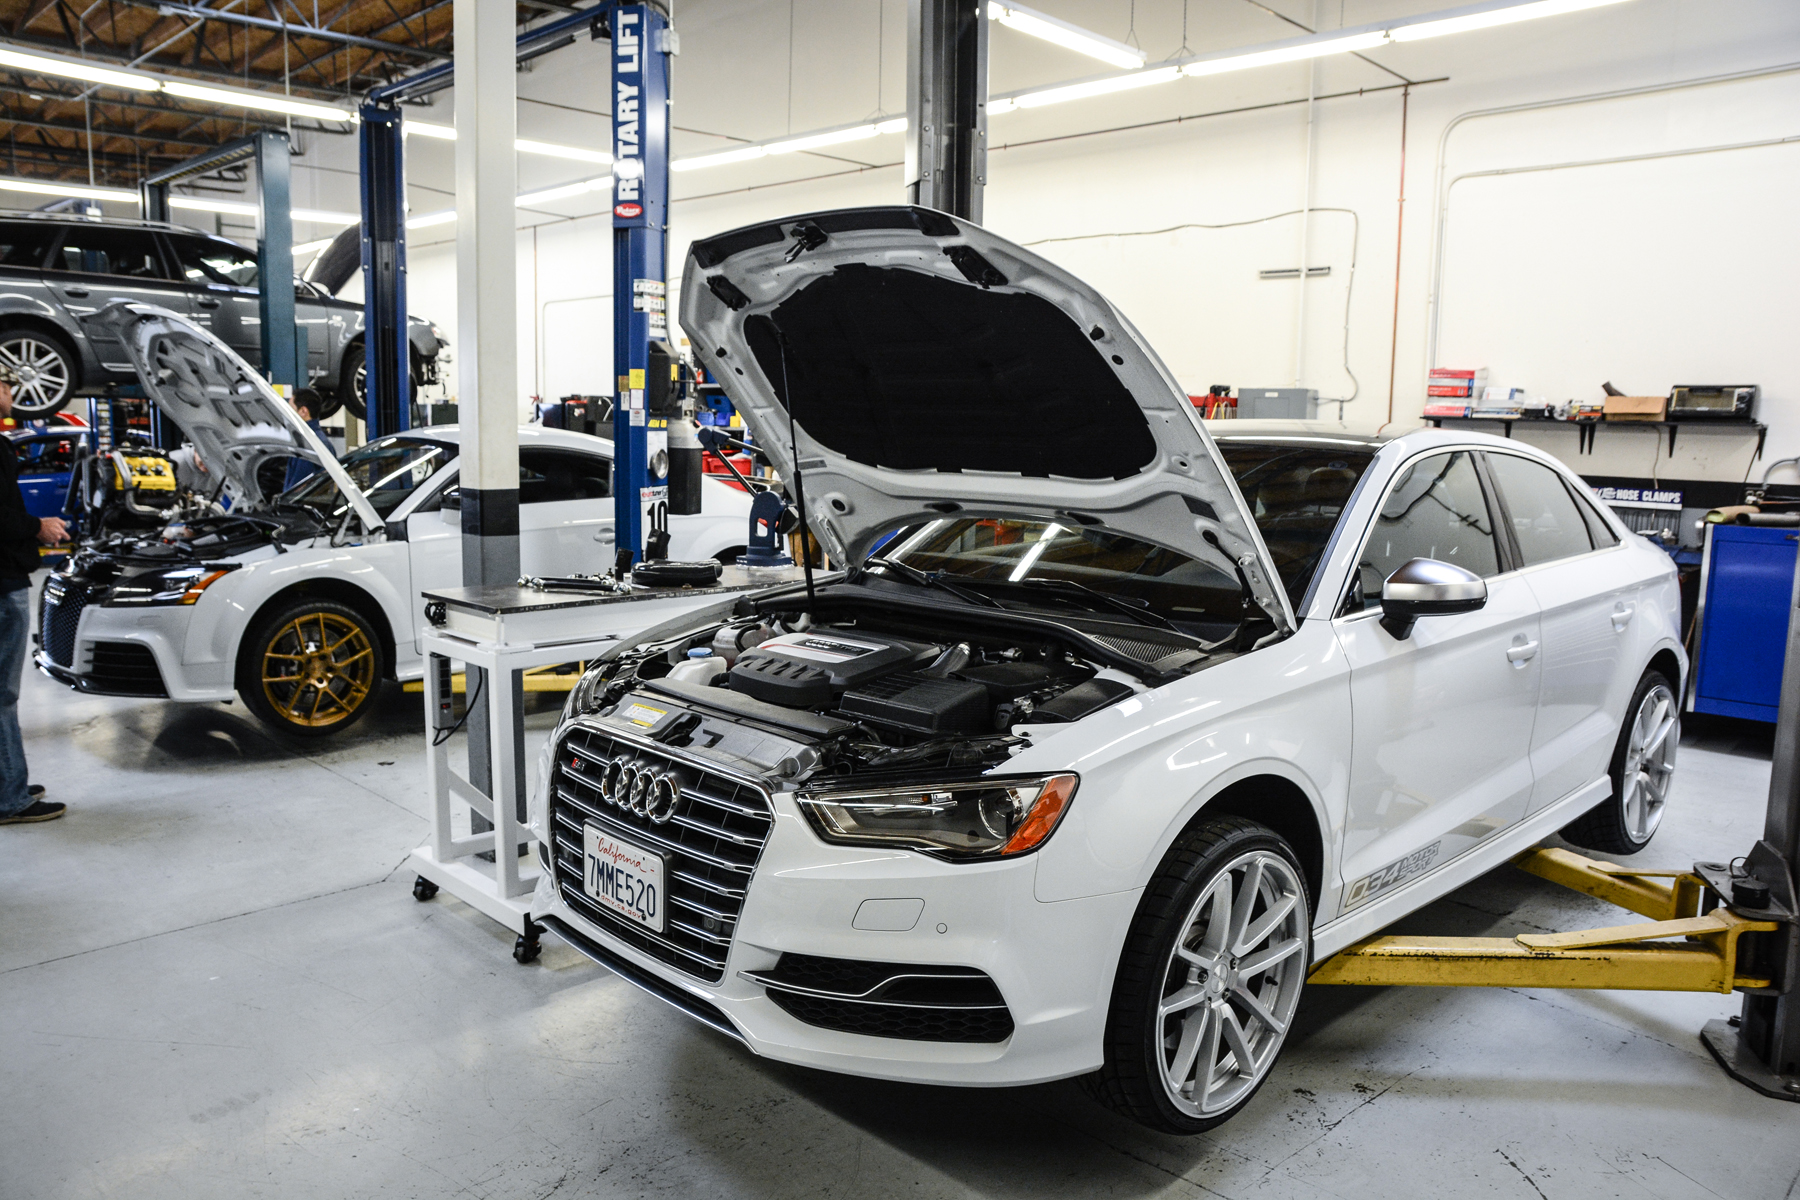 NorCal Audi Club's WinterFest 2016 Get-Together - Hosted by 034Motorsport